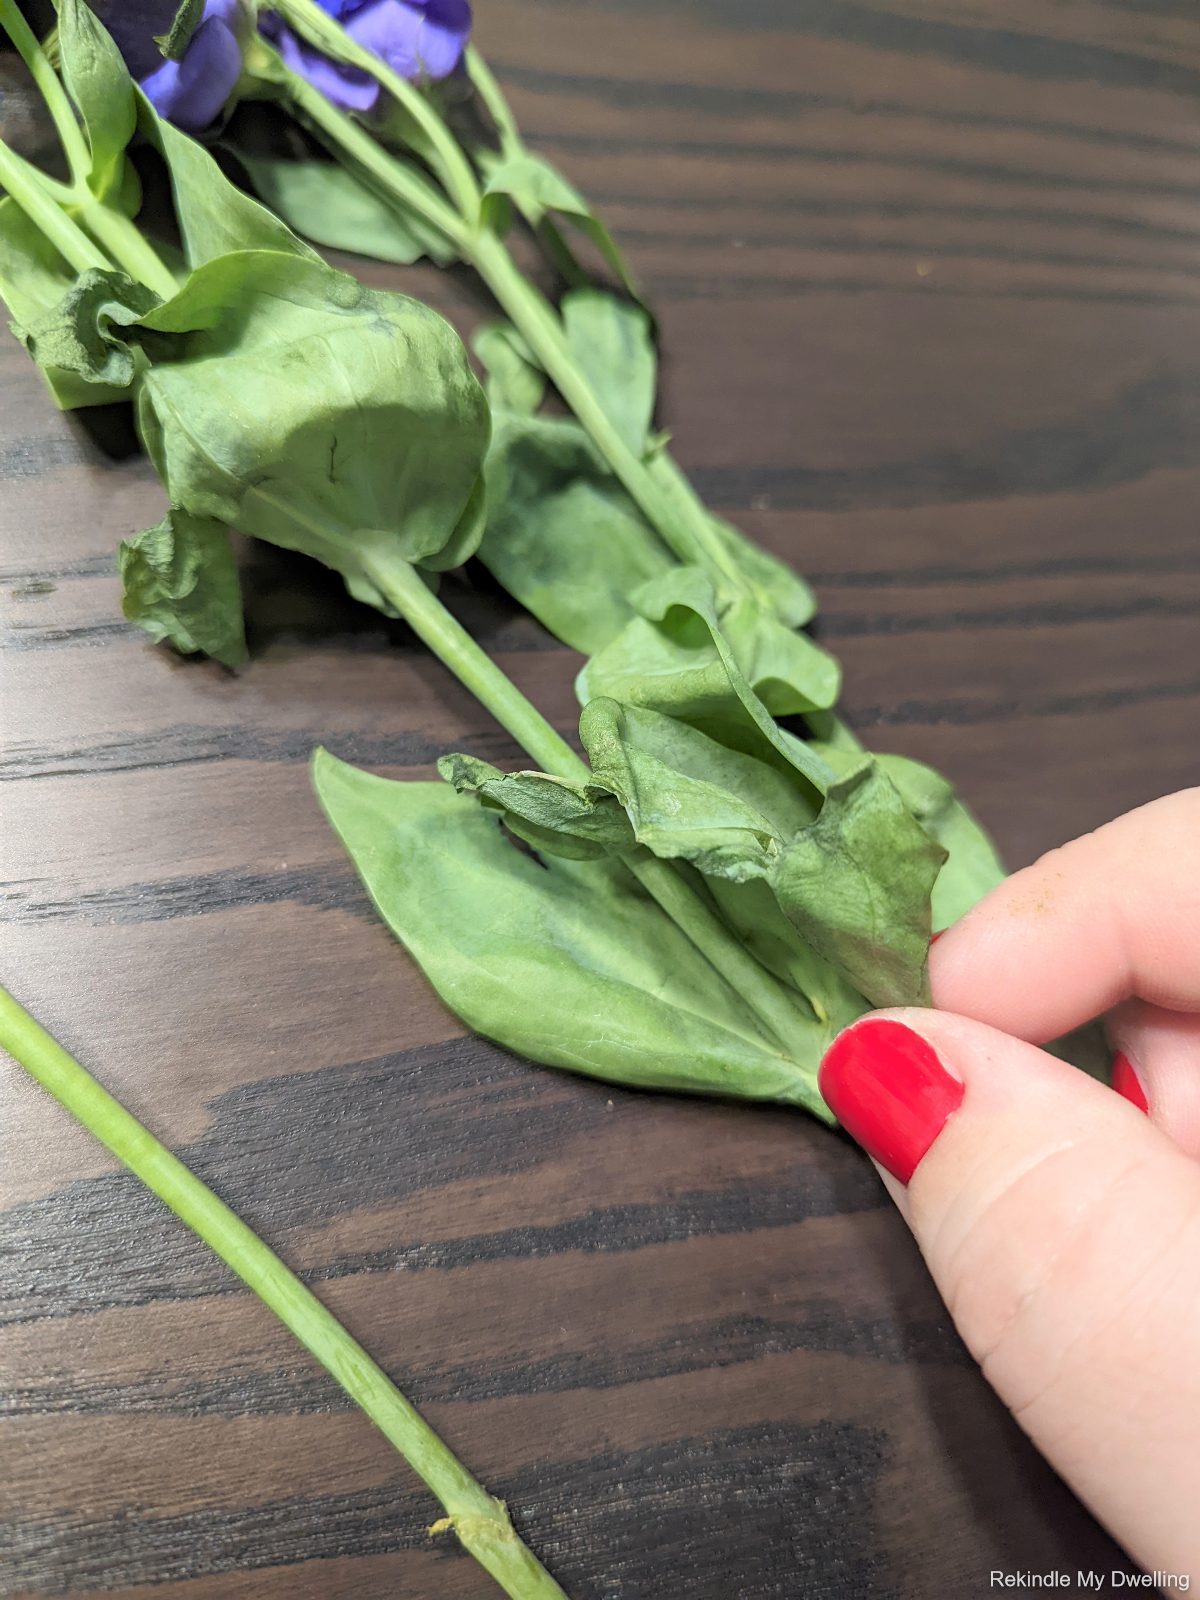 Removing wilted leaves from a flower.